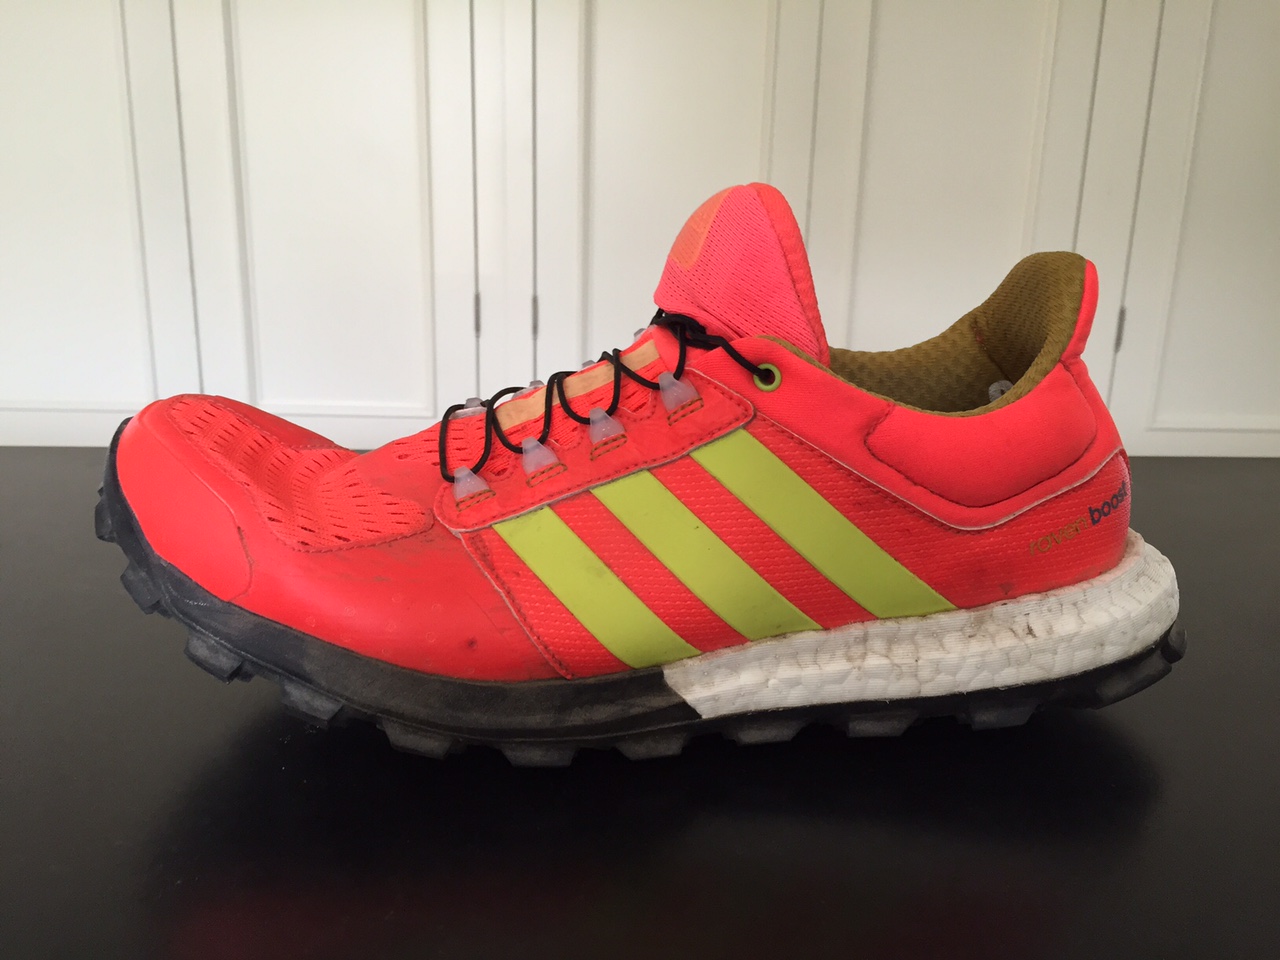 Road Trail Review: adidas Boost Trail Shoe. Ride on All